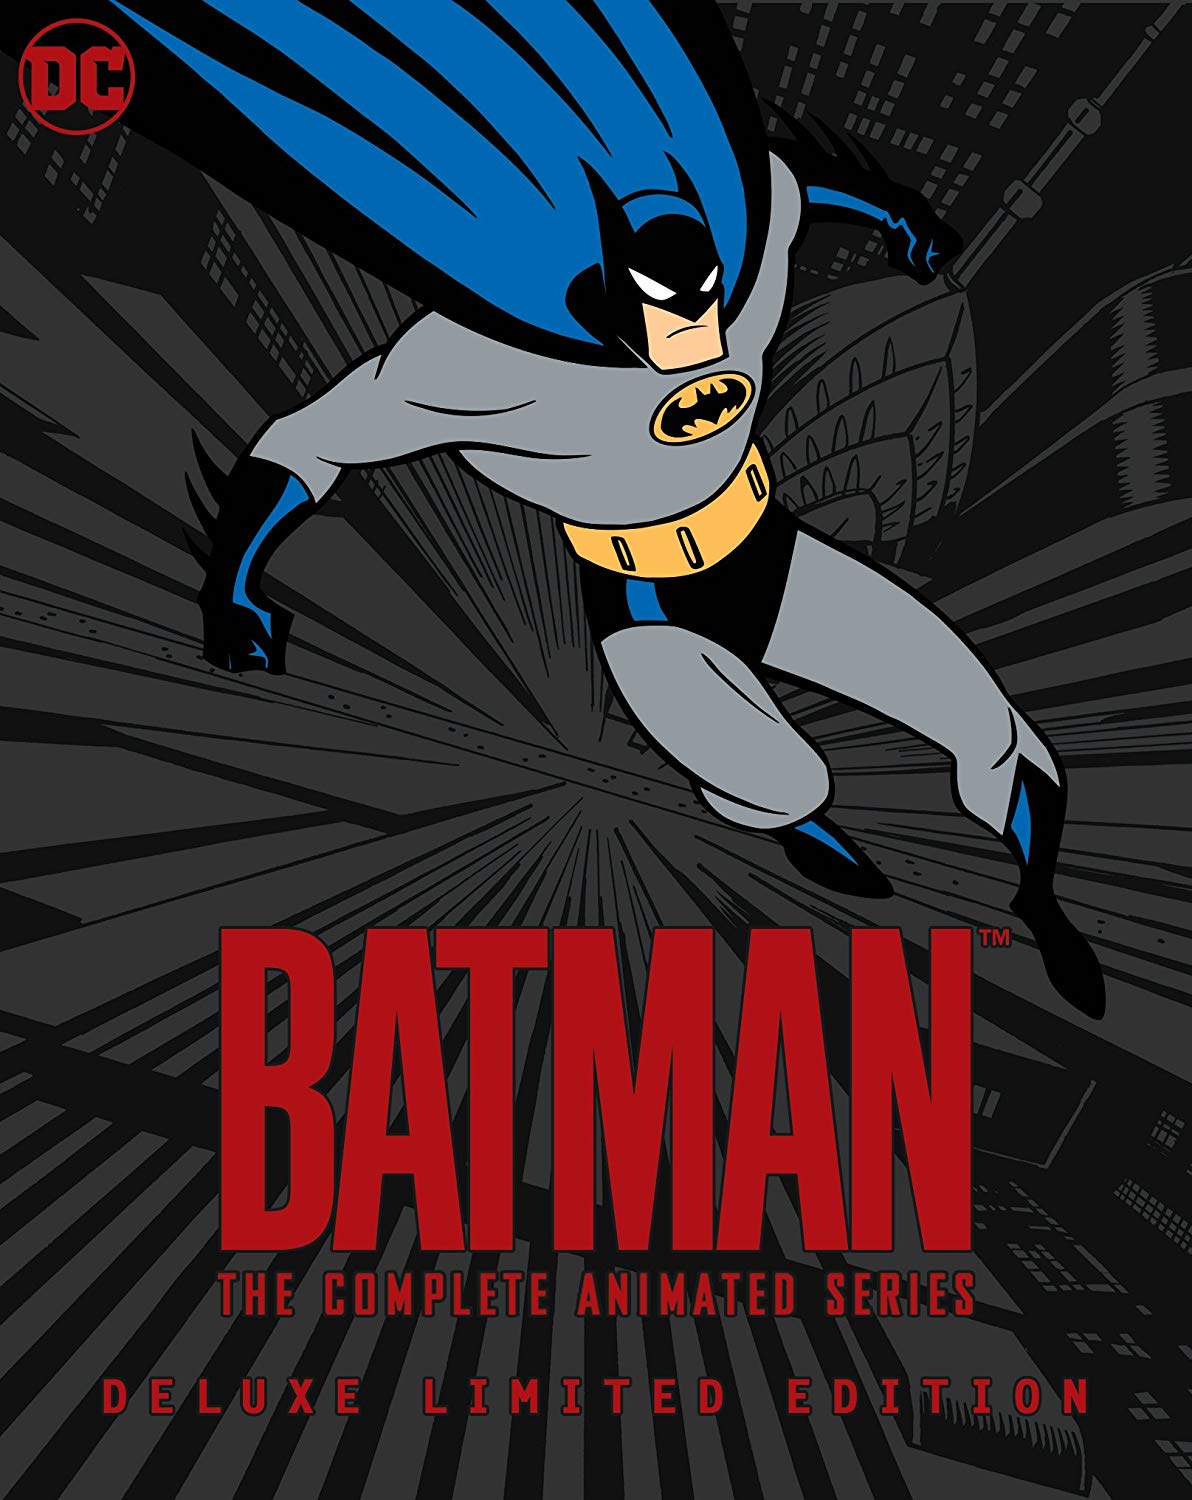 Batman: The Complete Animated Series Deluxe Limited Edition Blu-ray artwork  revealed